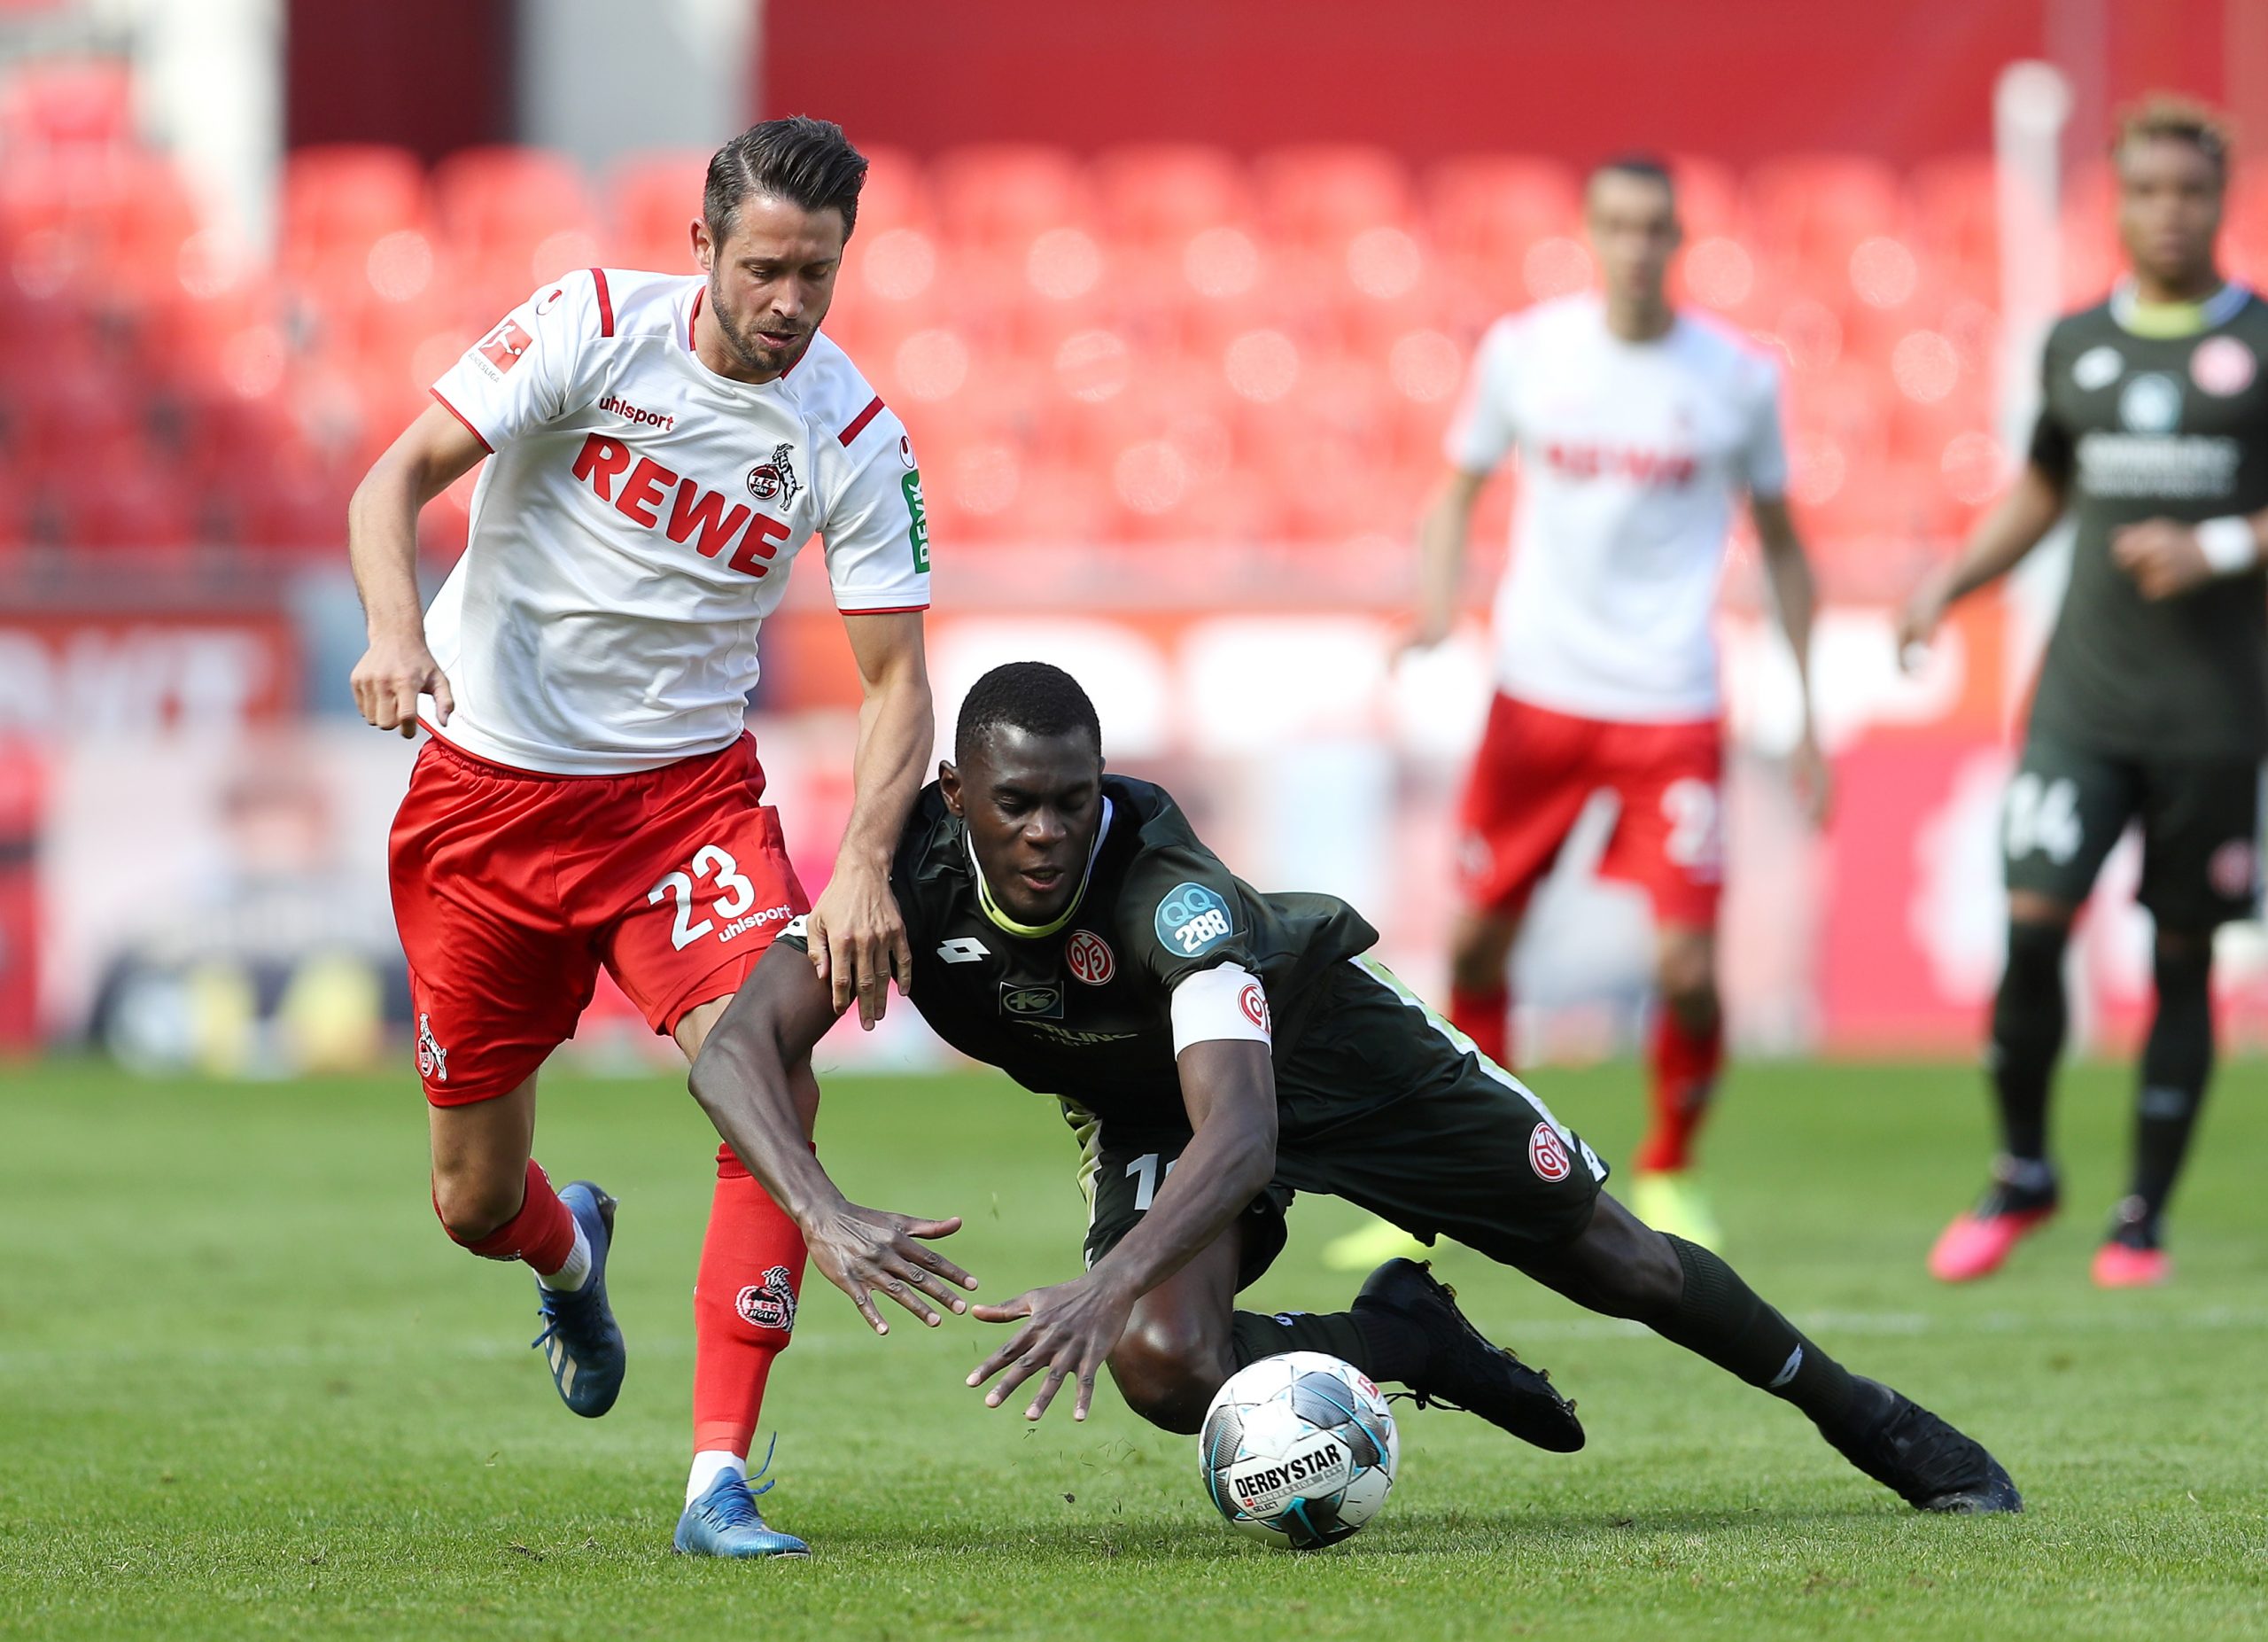 epa08428014 Mark Uth (L) of 1. FC Koeln and Moussa Niakhate of FSV Mainz 05 compete for the ball  during the German Bundesliga soccer match between 1. FC Koeln and 1. FSV Mainz 05 at RheinEnergieStadion in Cologne, Germany, 17 May 2020.  The German Bundesliga and Bundesliga Second Division are the first professional leagues to resume the season after the nationwide lockdown due to the ongoing Coronavirus (COVID-19) pandemic. All matches until the end of the season will be played behind closed doors.  EPA/LARS BARON / POOL DFL regulations prohibit any use of photographs as image sequences and/or quasi-video.